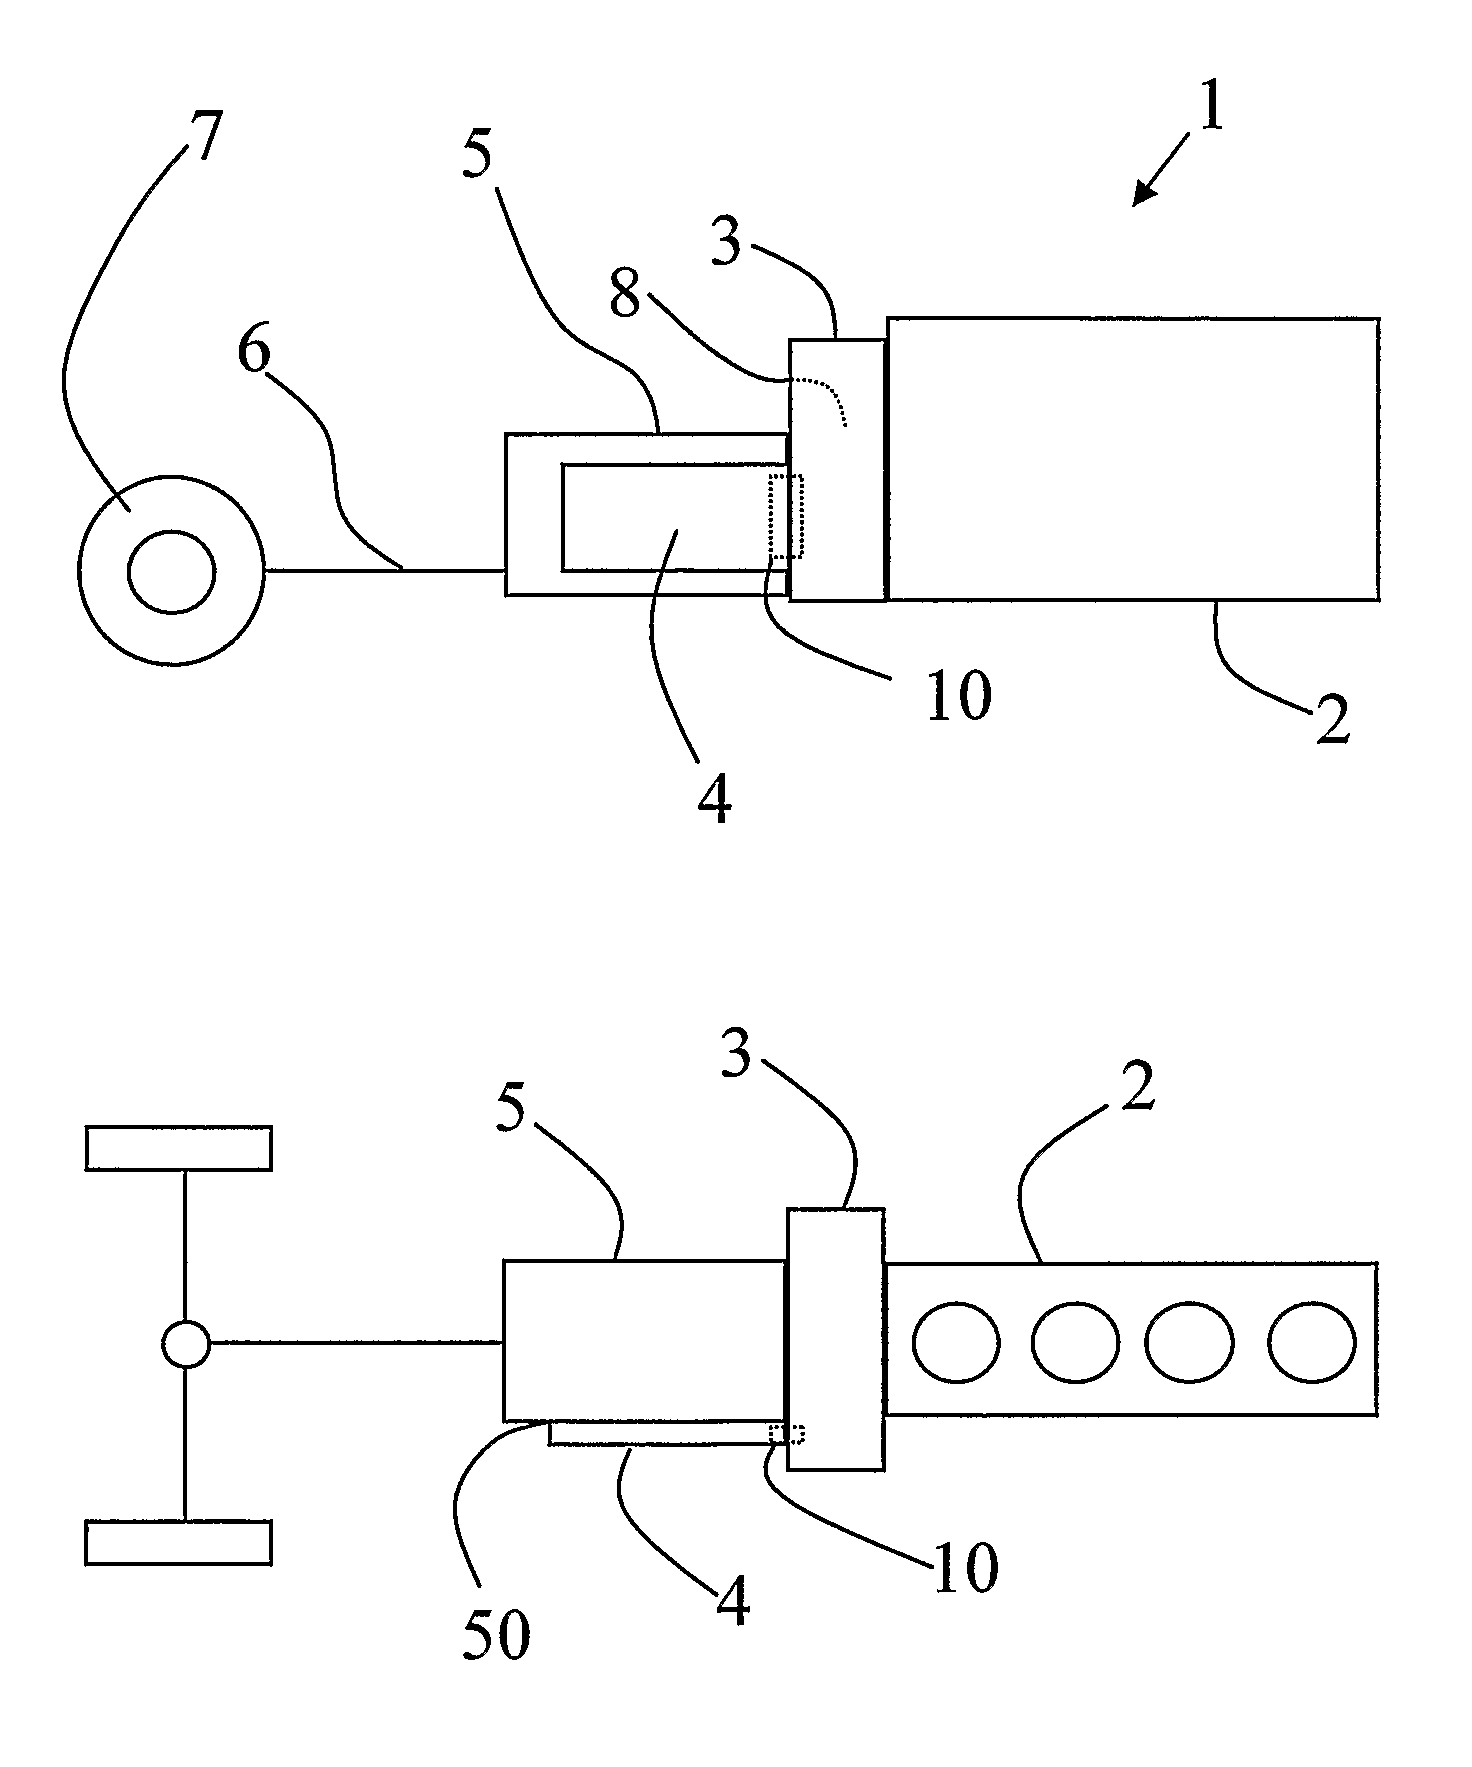 Arrangement for a power electronics unit in a hybrid vehicle